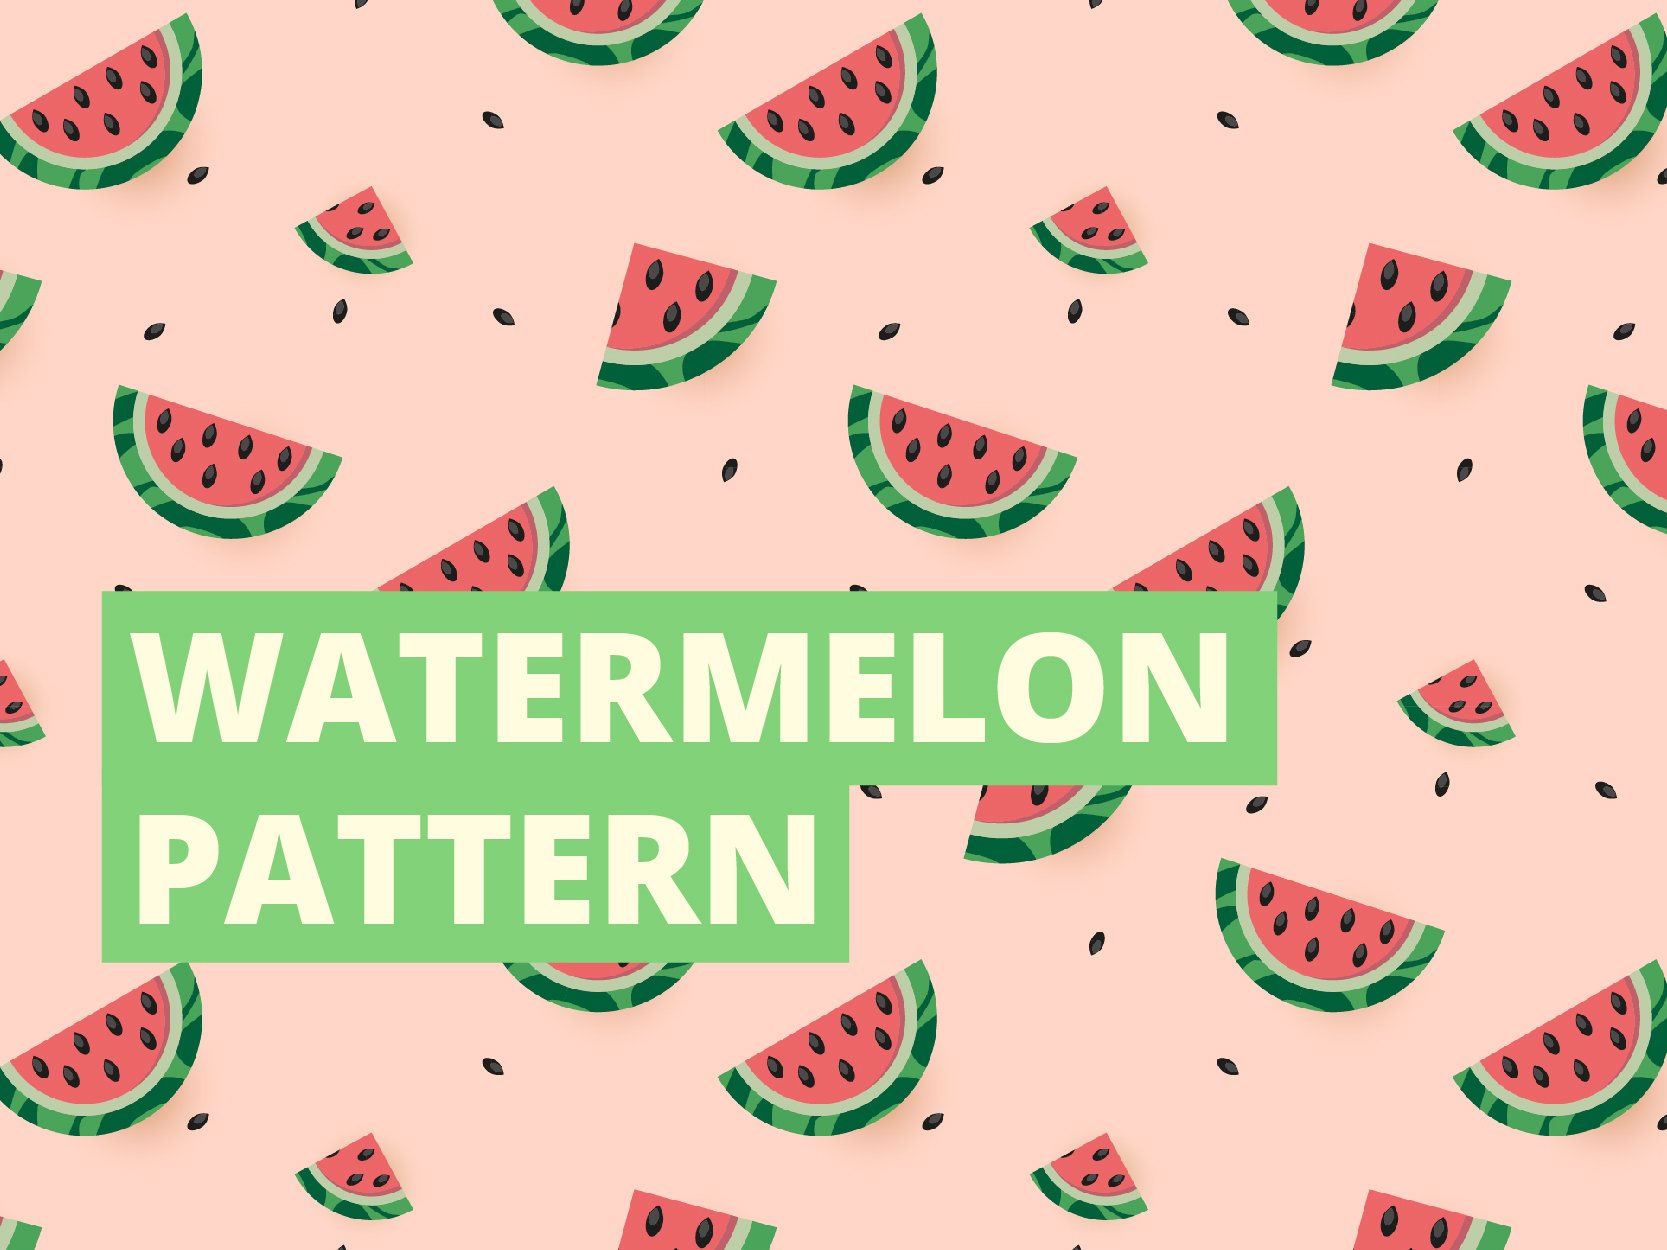 Watermelon Pattern cover image.